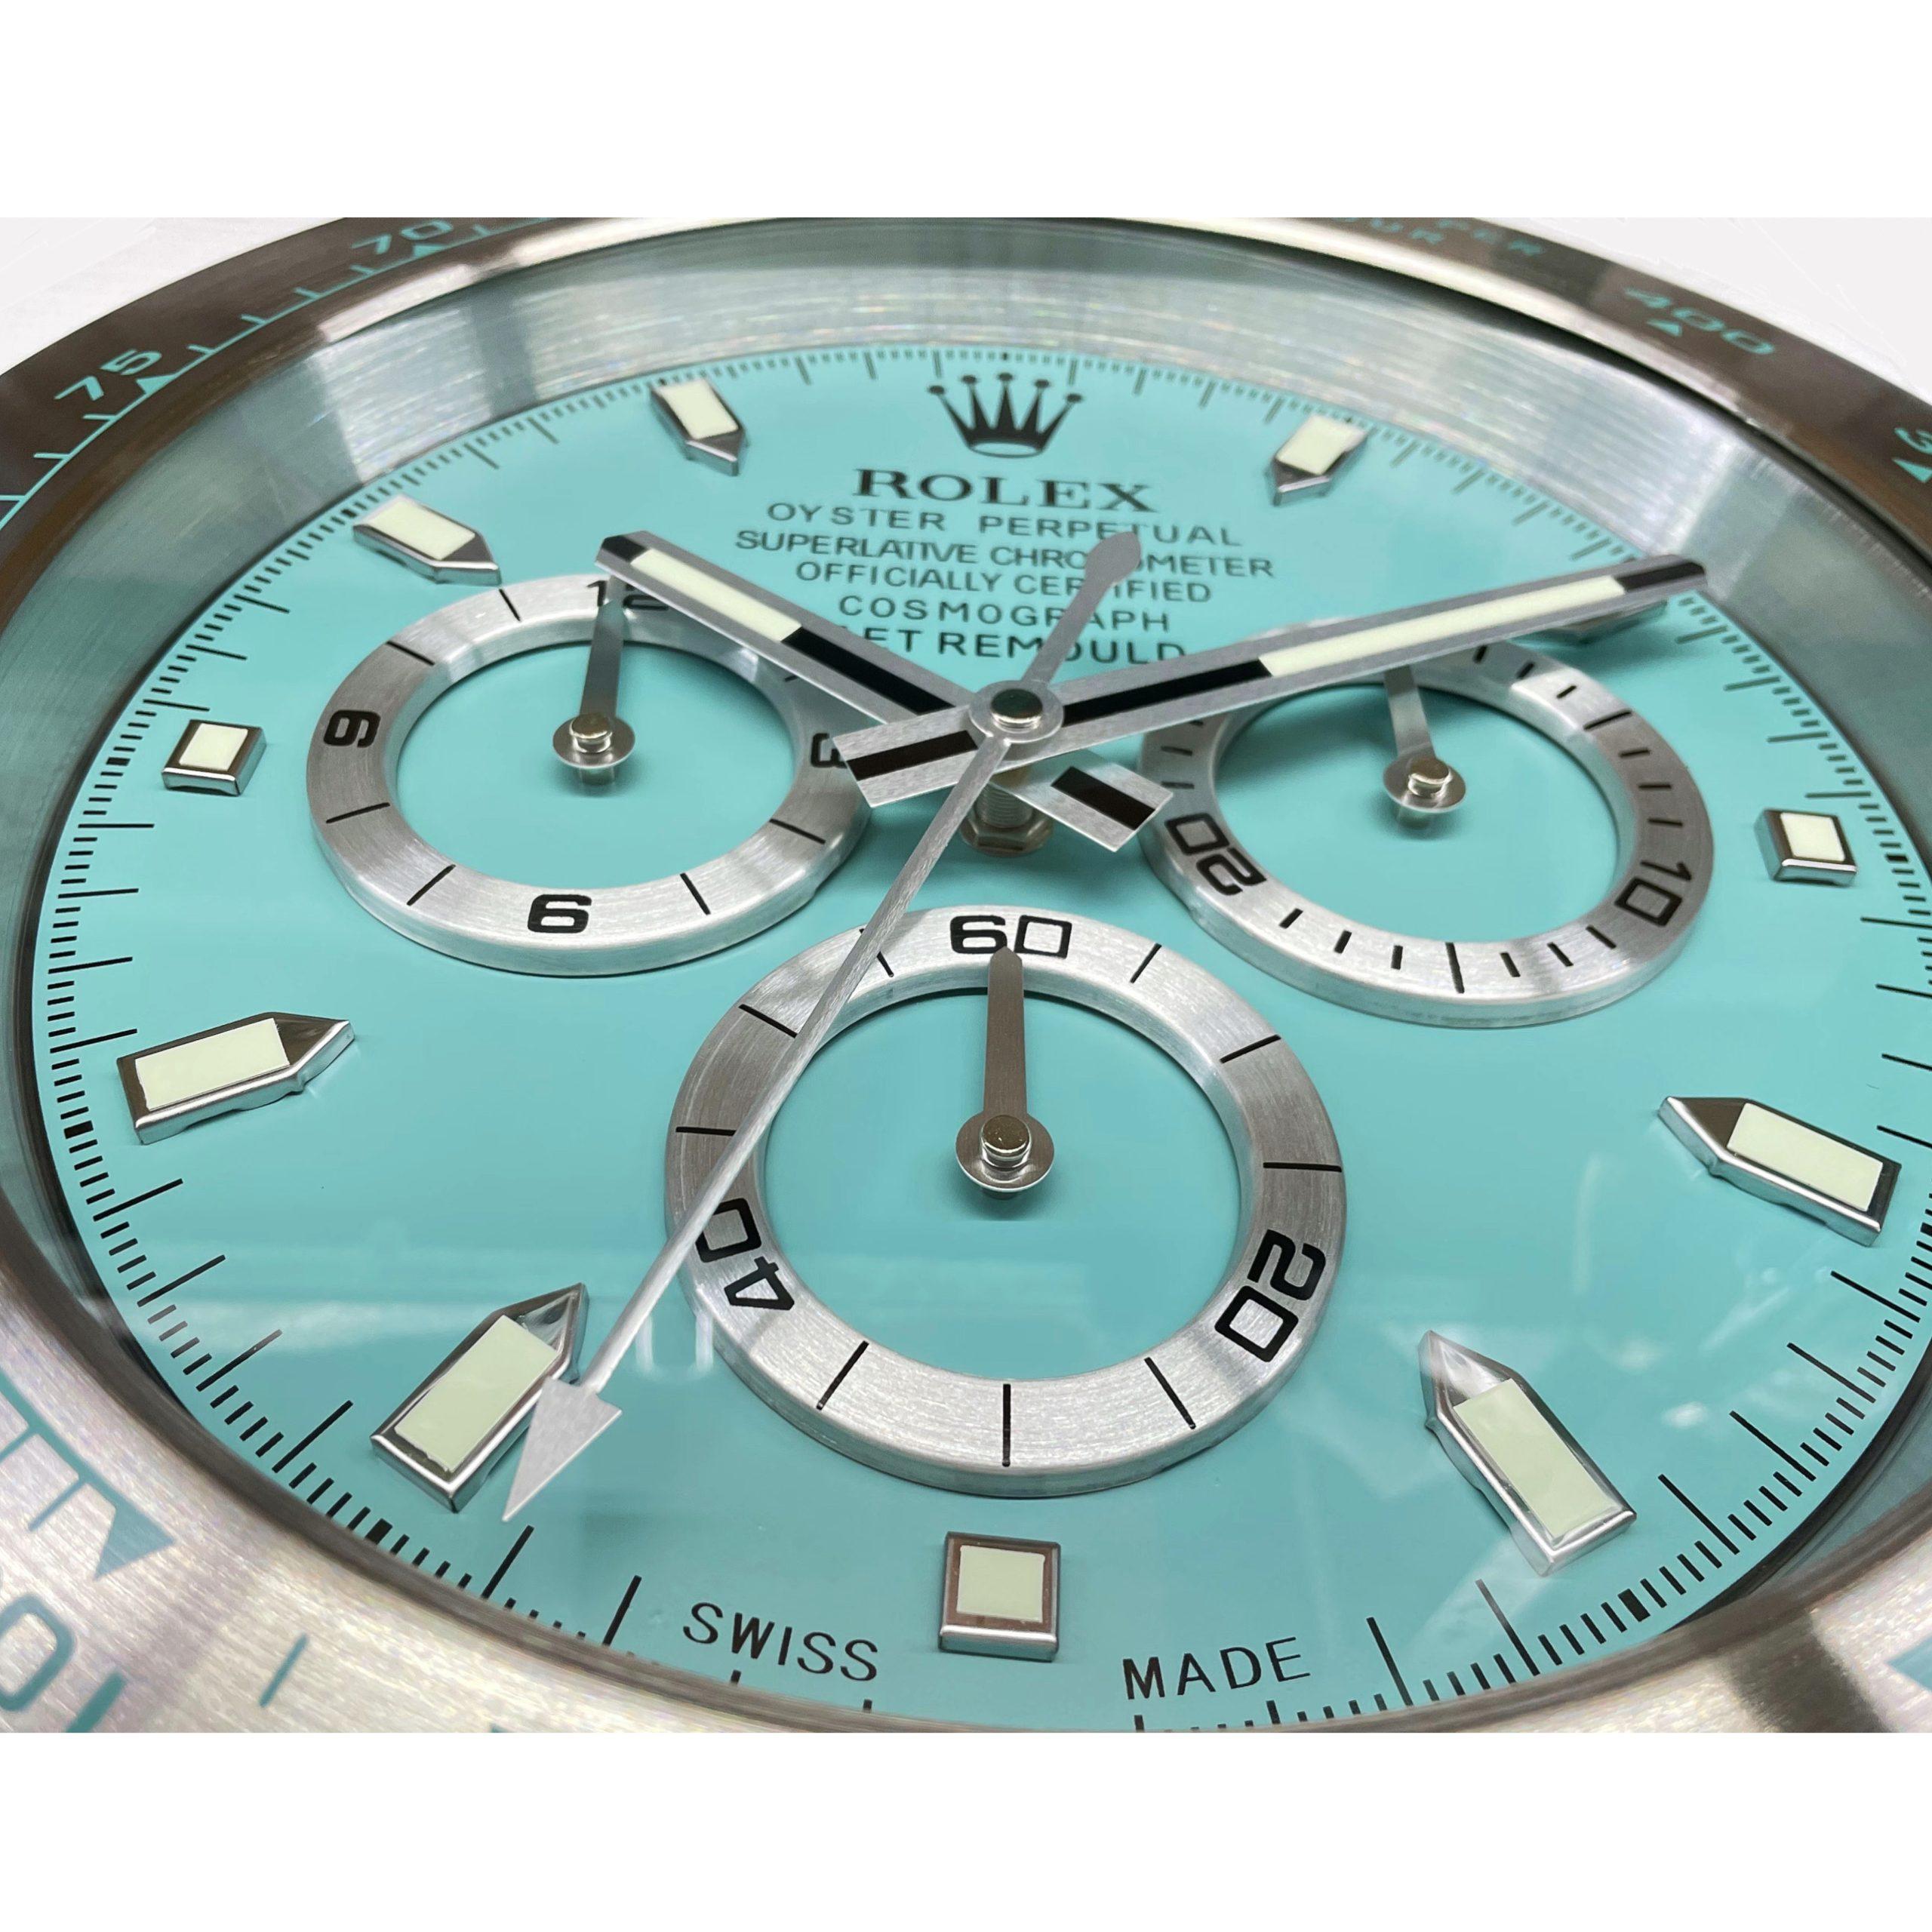 ROLEX Officially Certified Oyster Perpetual Tiffany Blue Daytona Wall Clock 
Good condition, working.
Free international shipping.
Sweeping Quartz movement powered by single AA Battery.
Clock dimensions measure approximately 34cm by 5cm